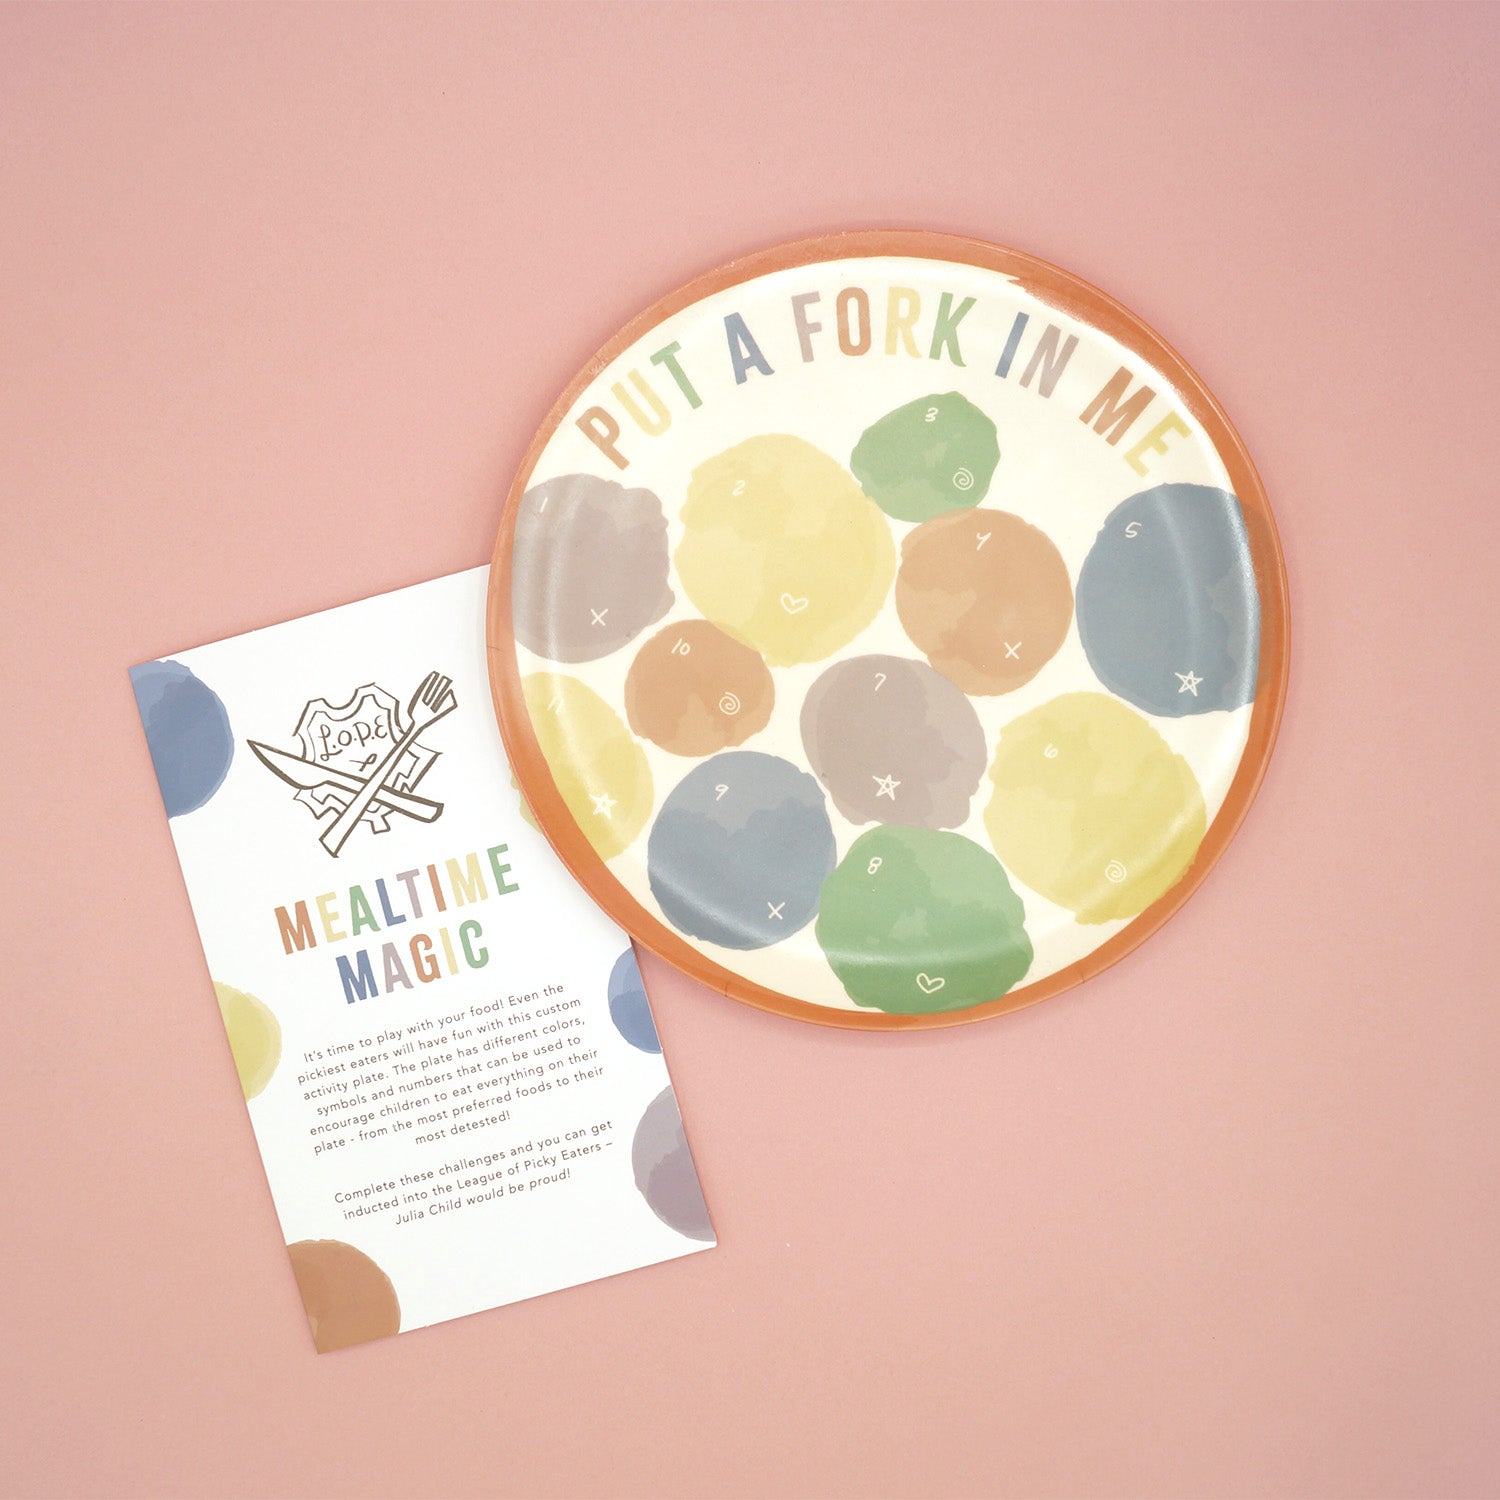 Set of 2 plates with multicolored blobs printed on them and text saying Put a Fork In Me.